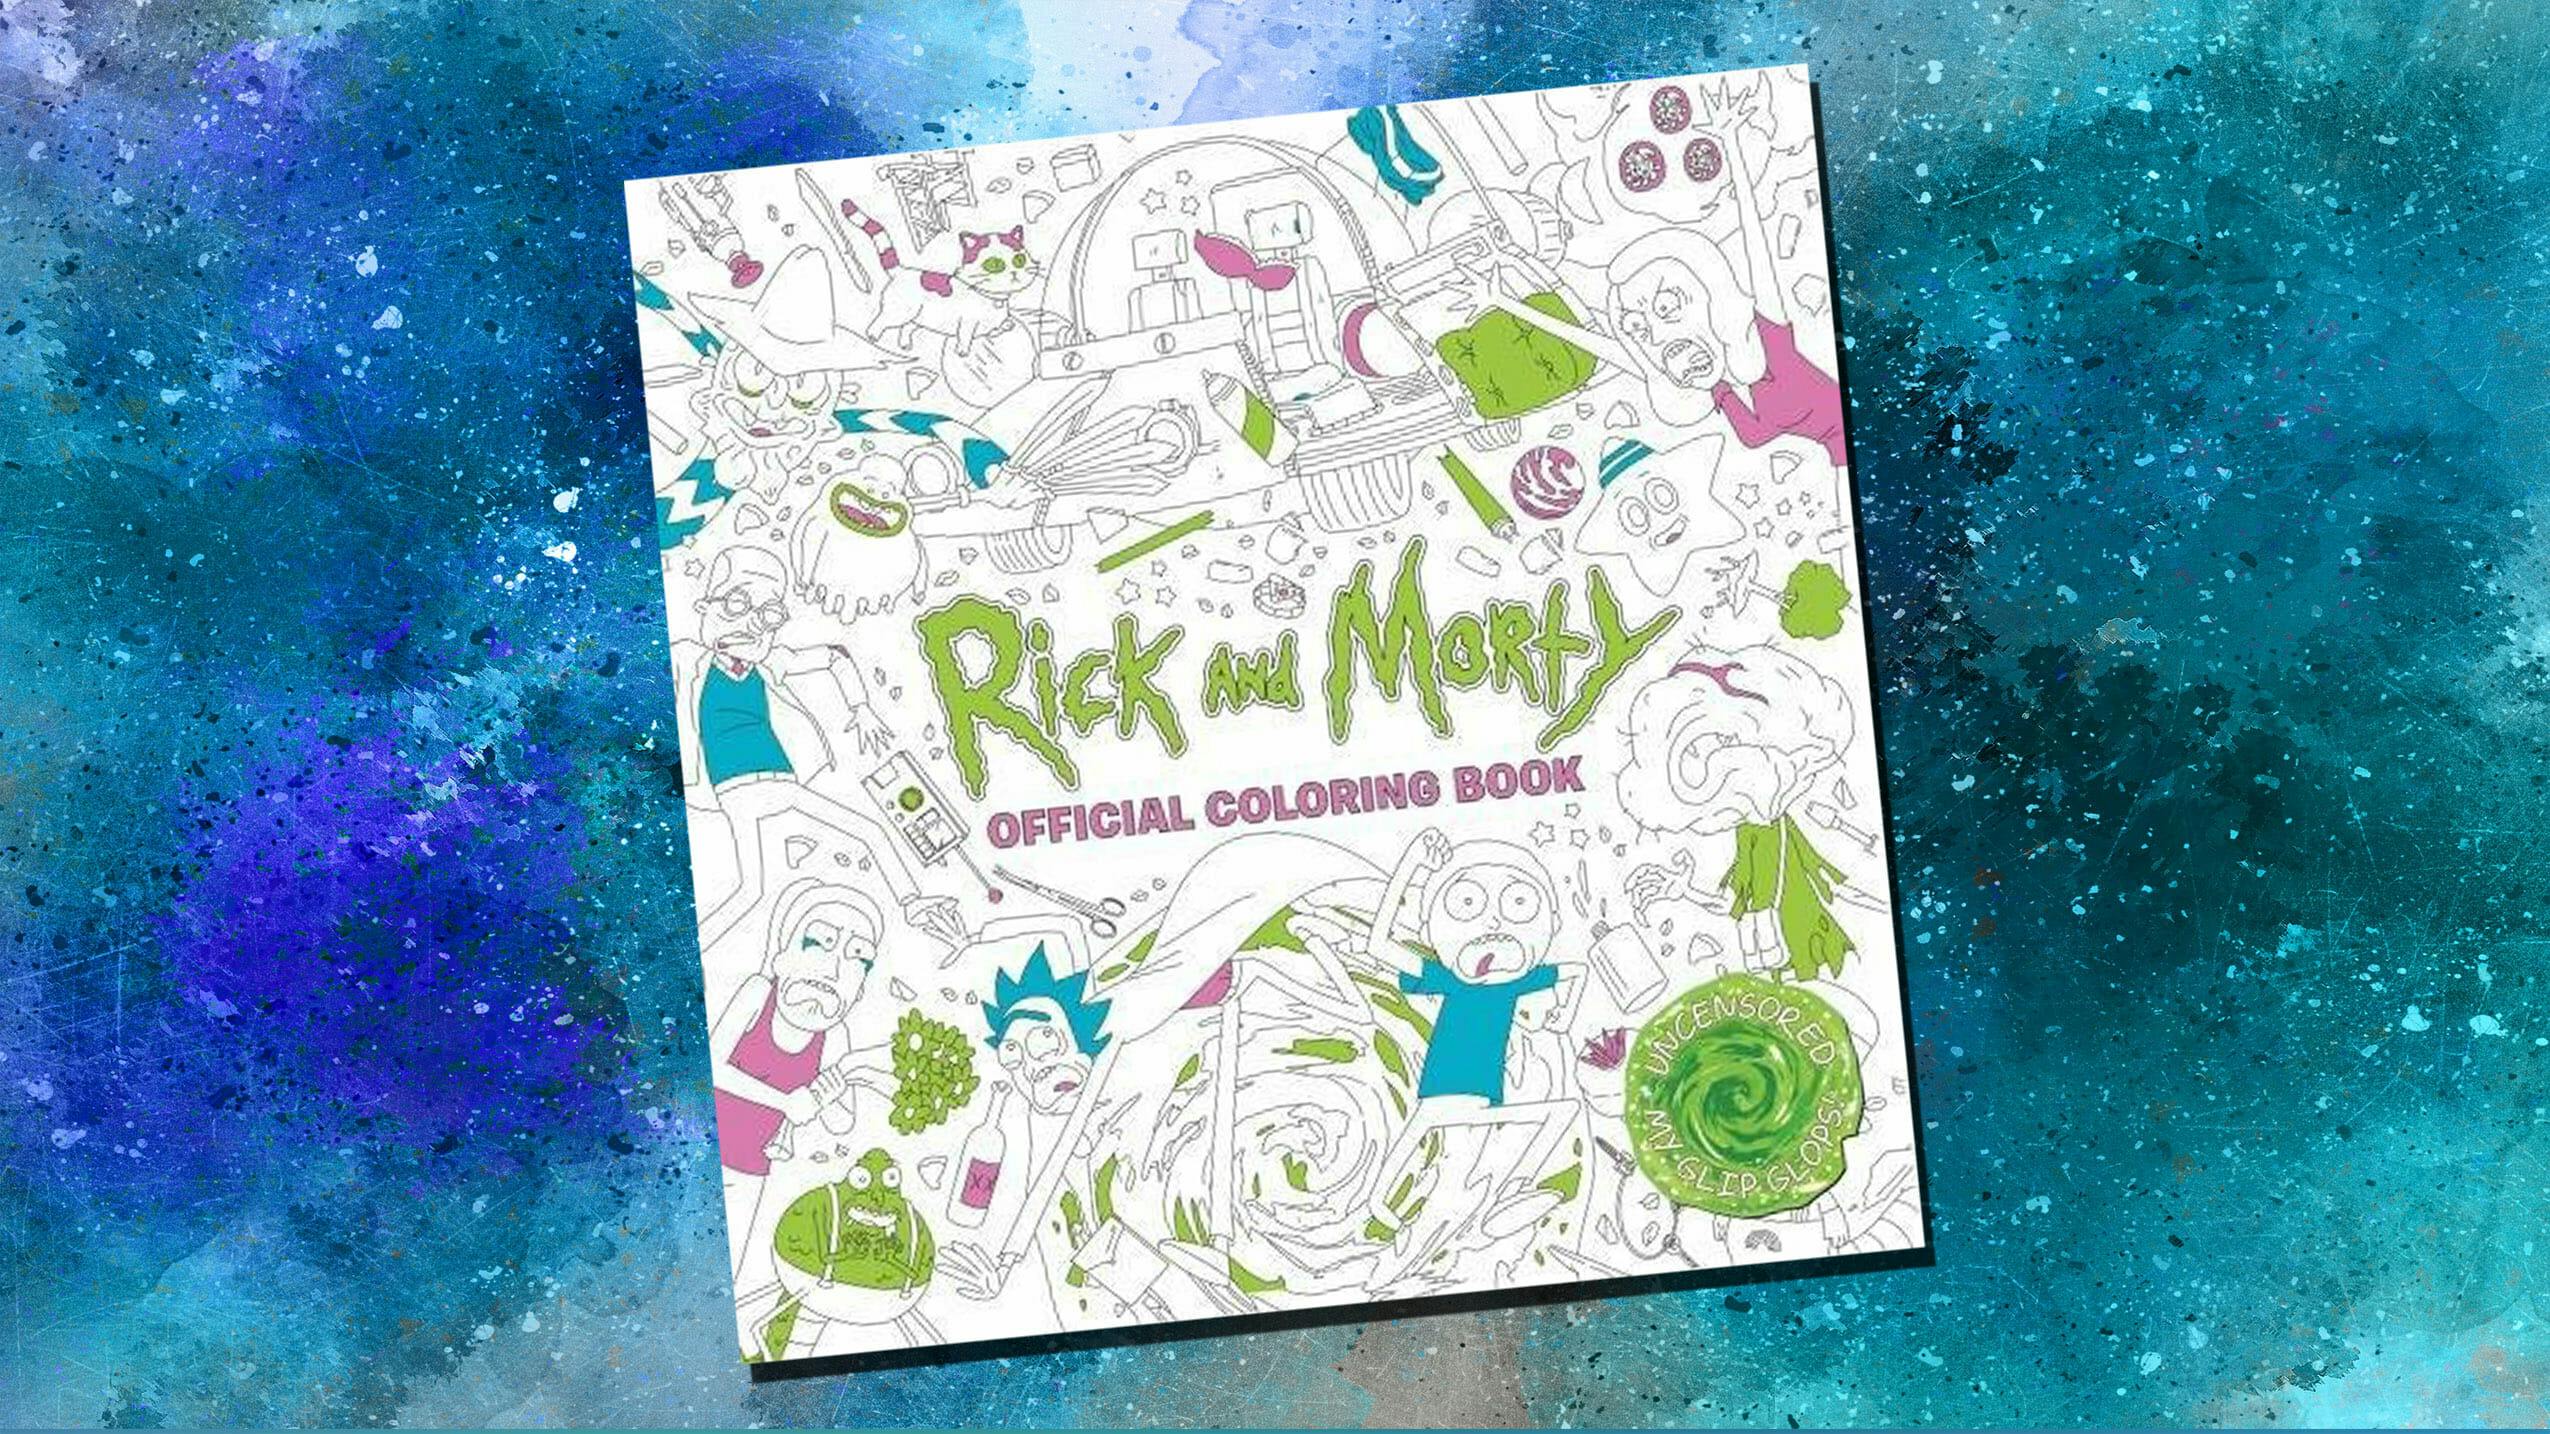 Crayon in some seriously dark adventures with this Rick and Morty coloring  book